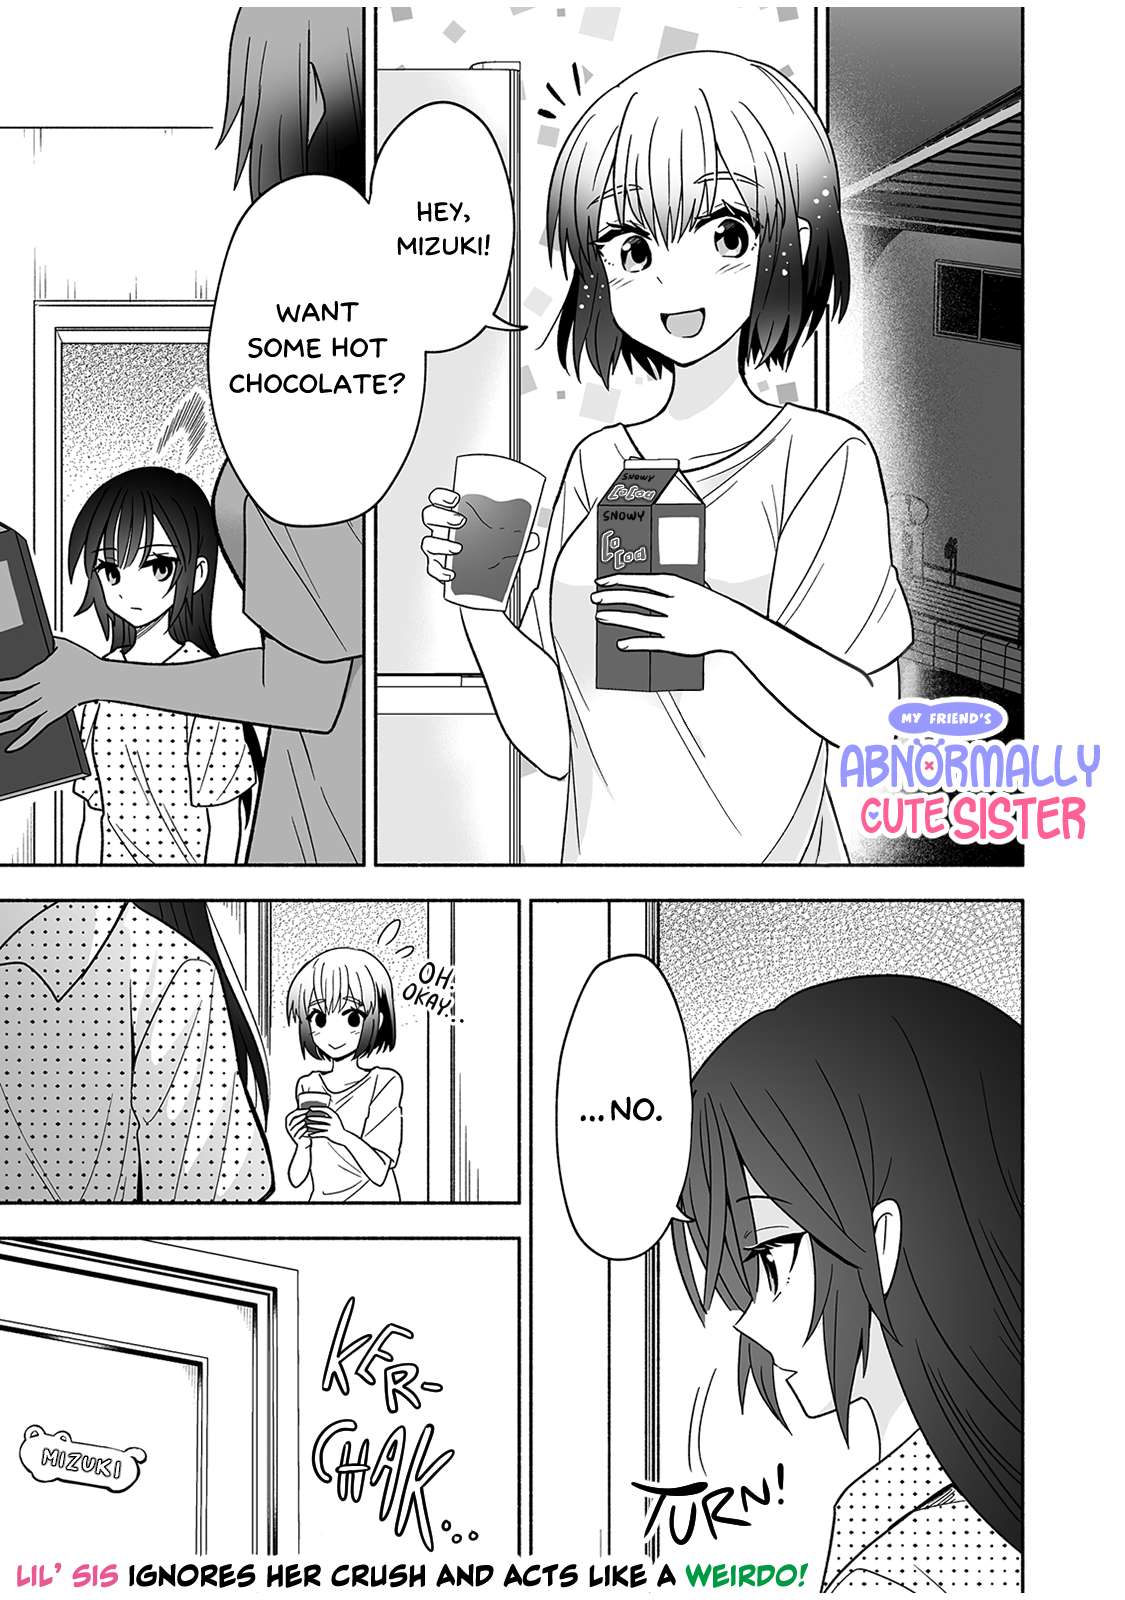 My Friend's Abnormally Cute Sister - chapter 3 - #1